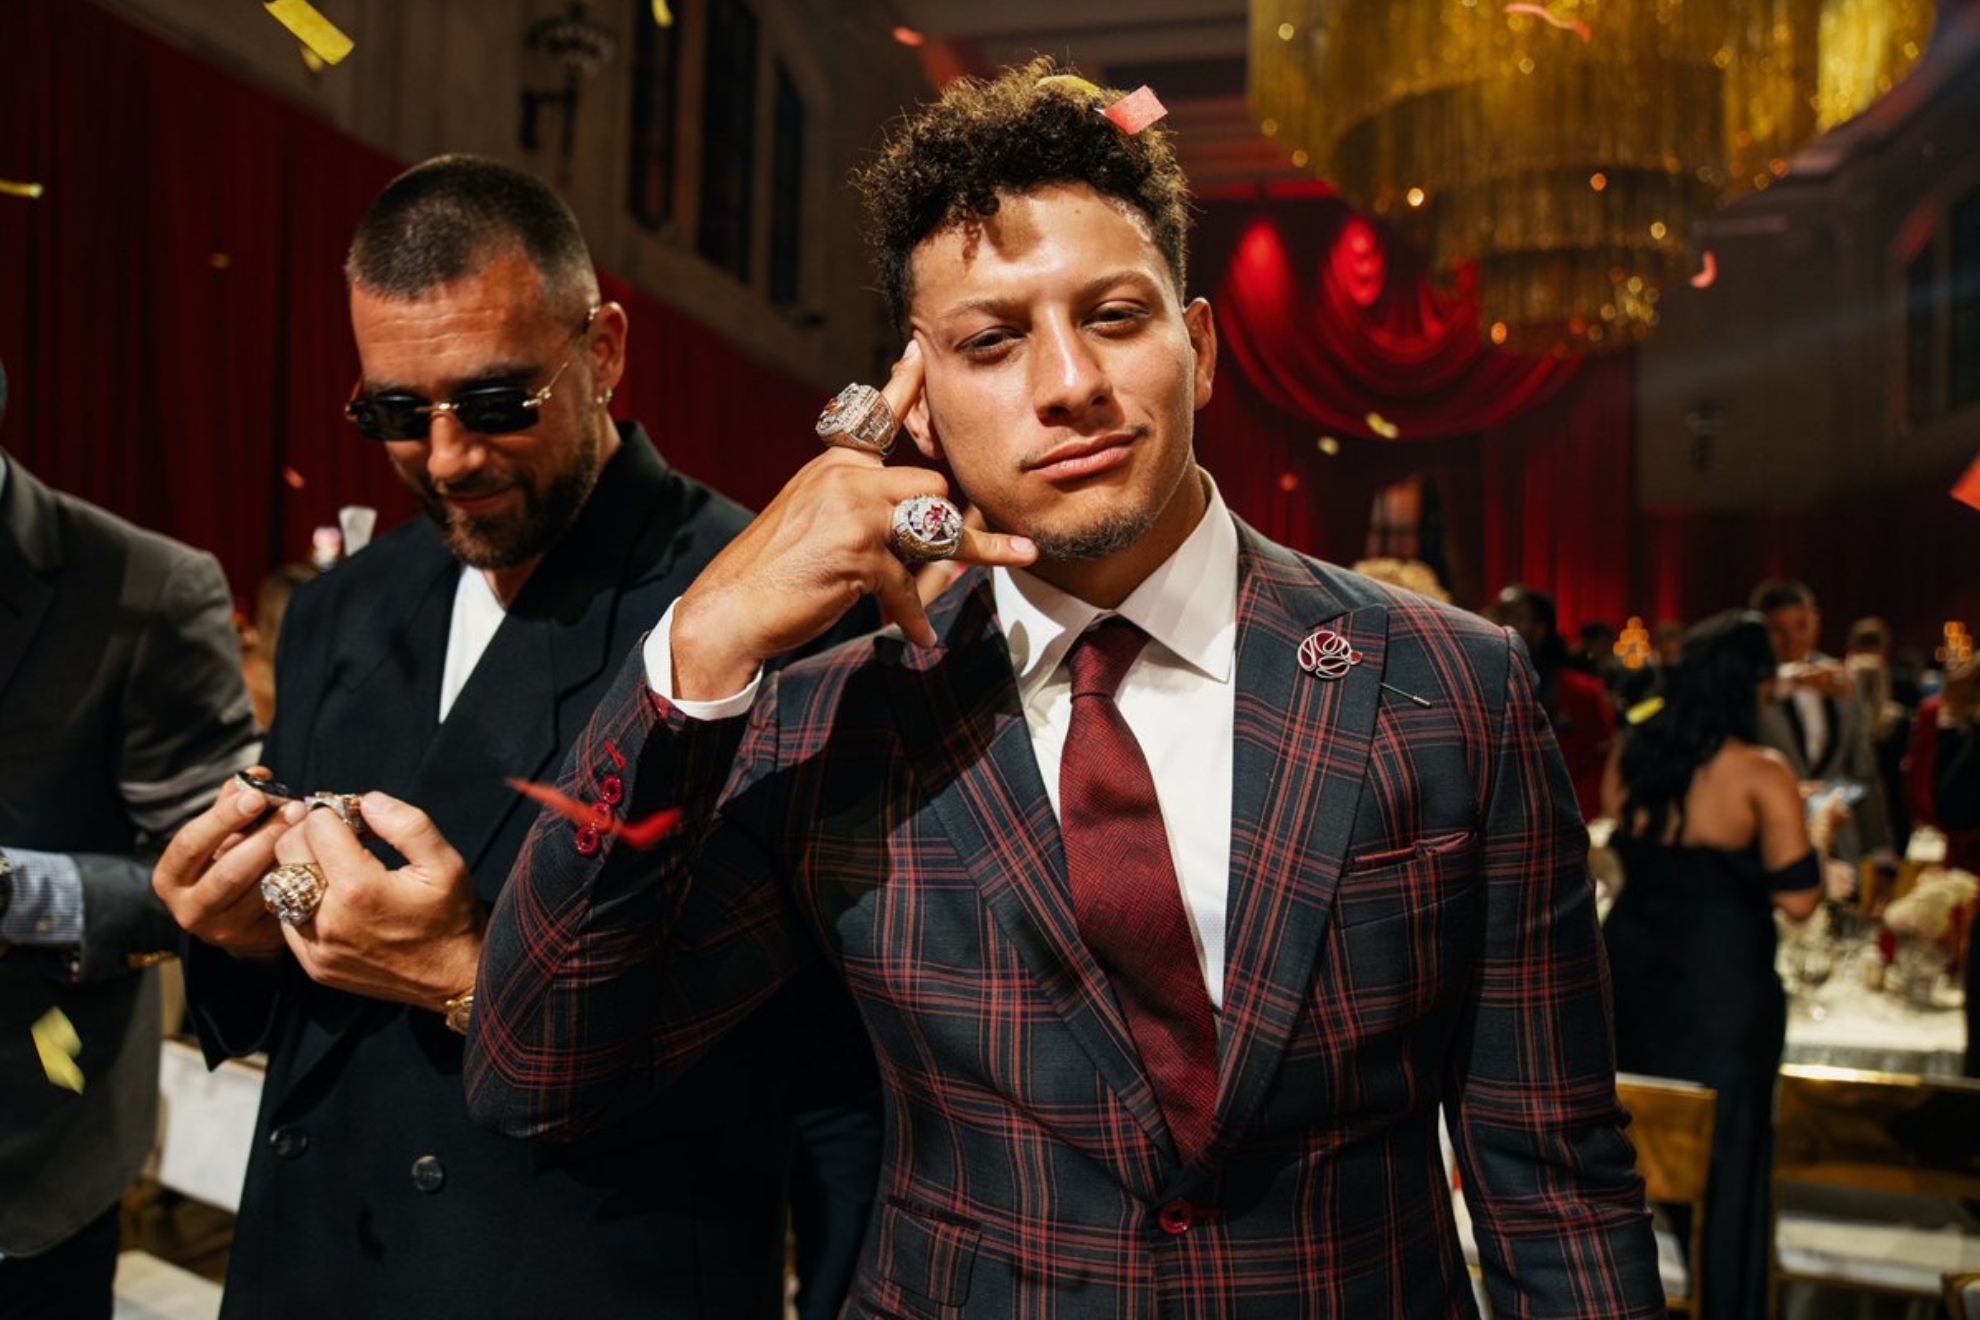 Patrick Mahomes showing off his two Super Bowl rings.